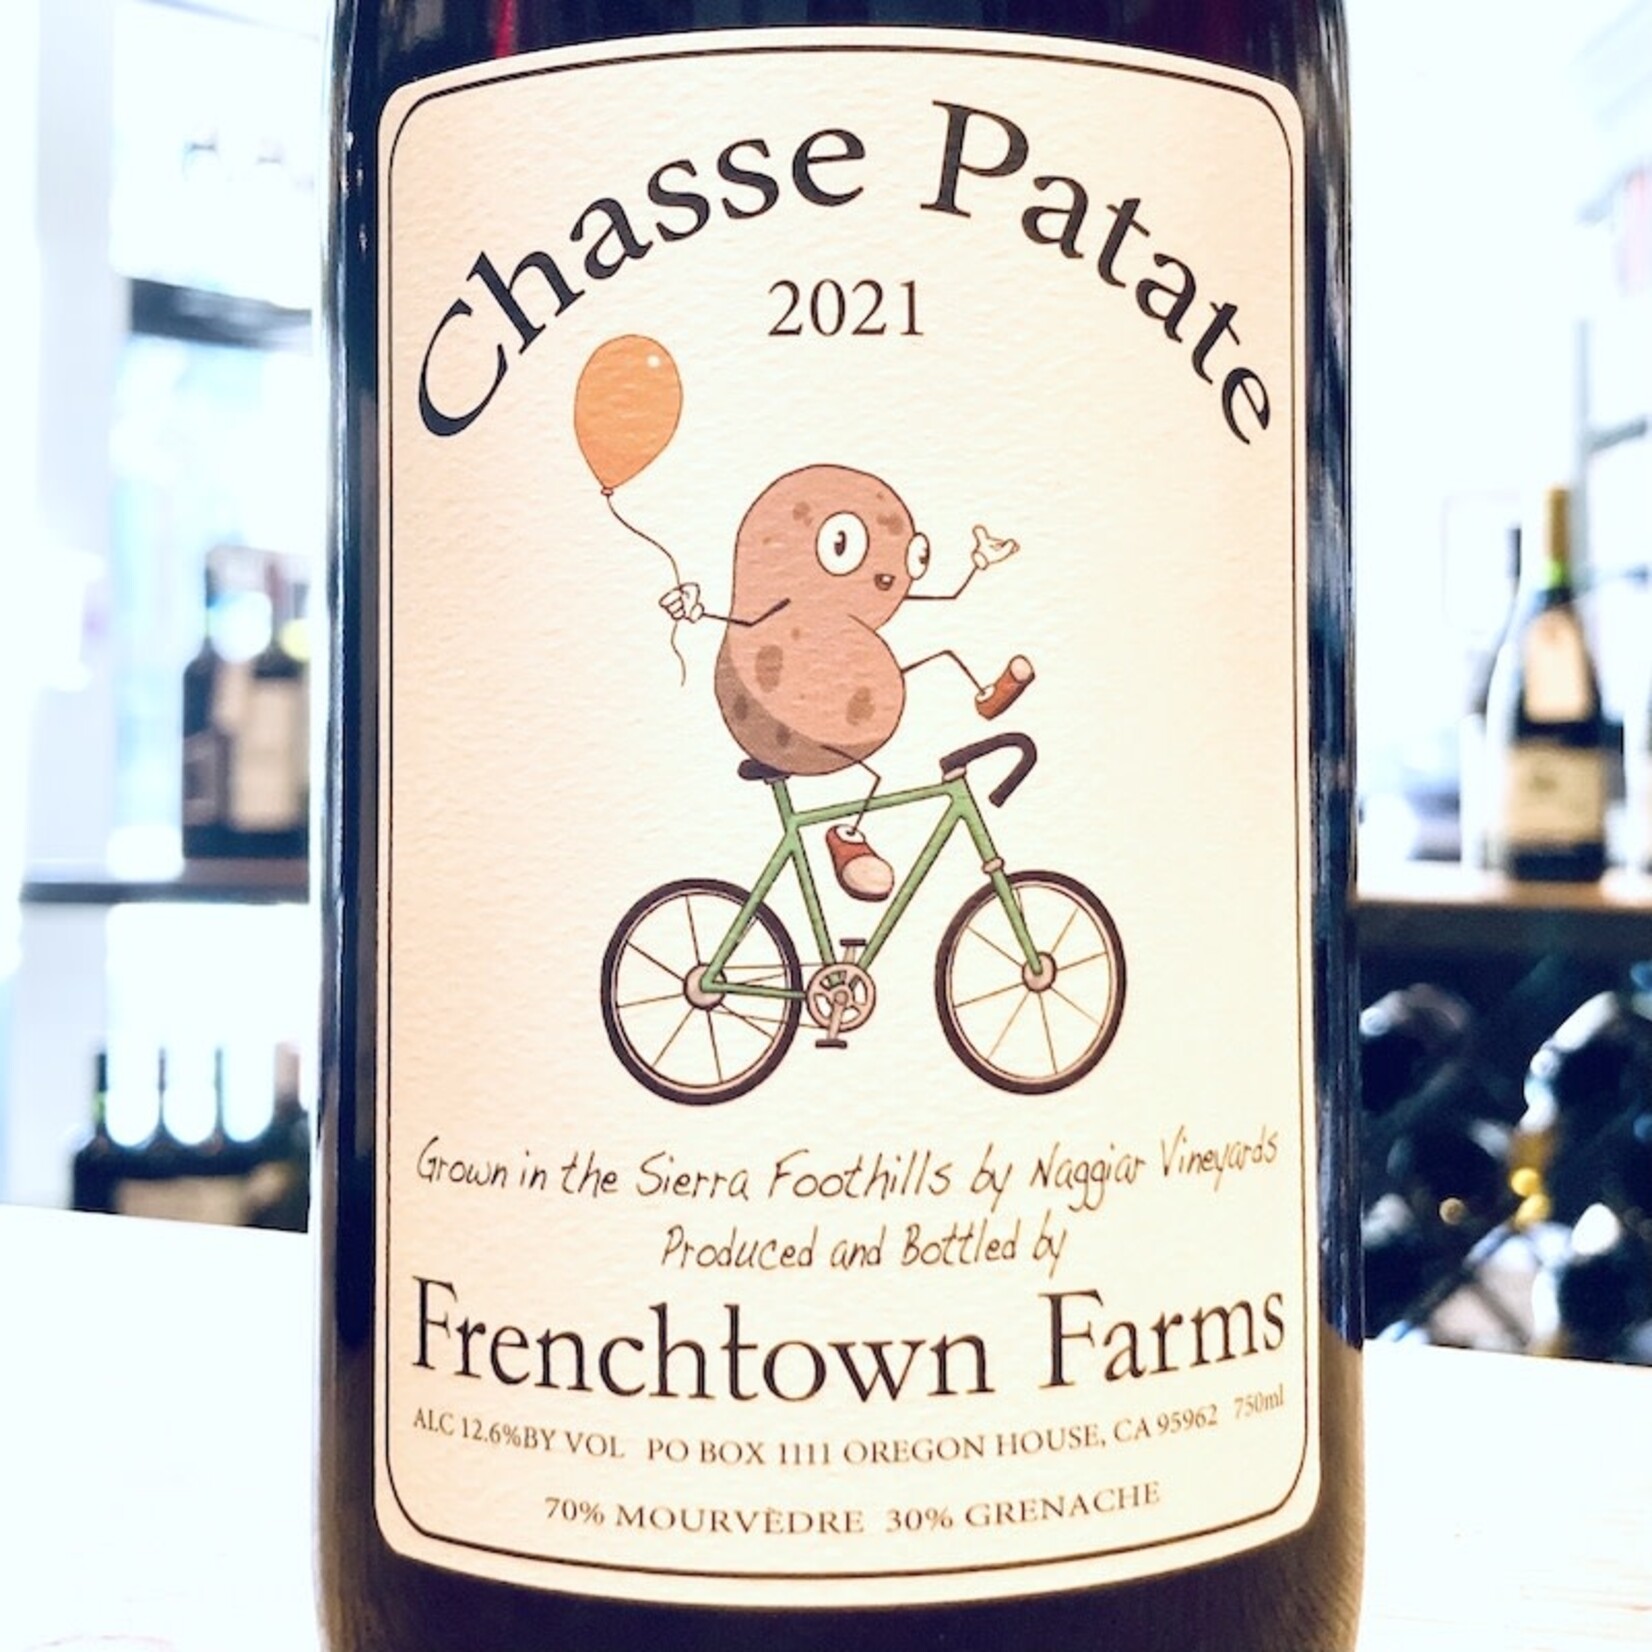 USA 2022 Frenchtown Farms "Chasse Patate" Sierra Foothills